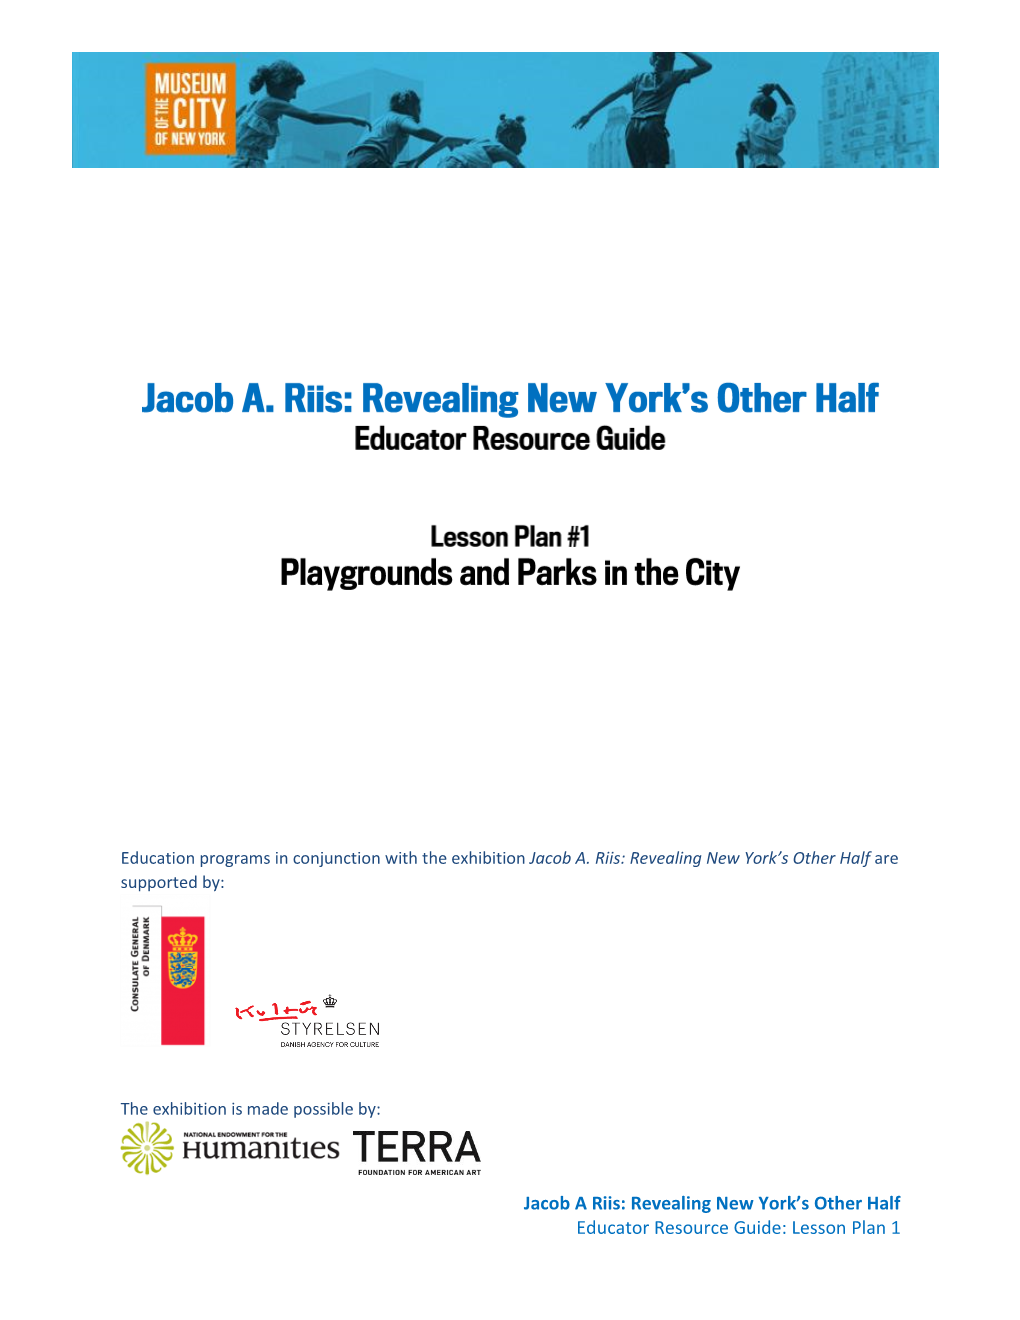 Jacob a Riis: Revealing New York’S Other Half Educator Resource Guide: Lesson Plan 1